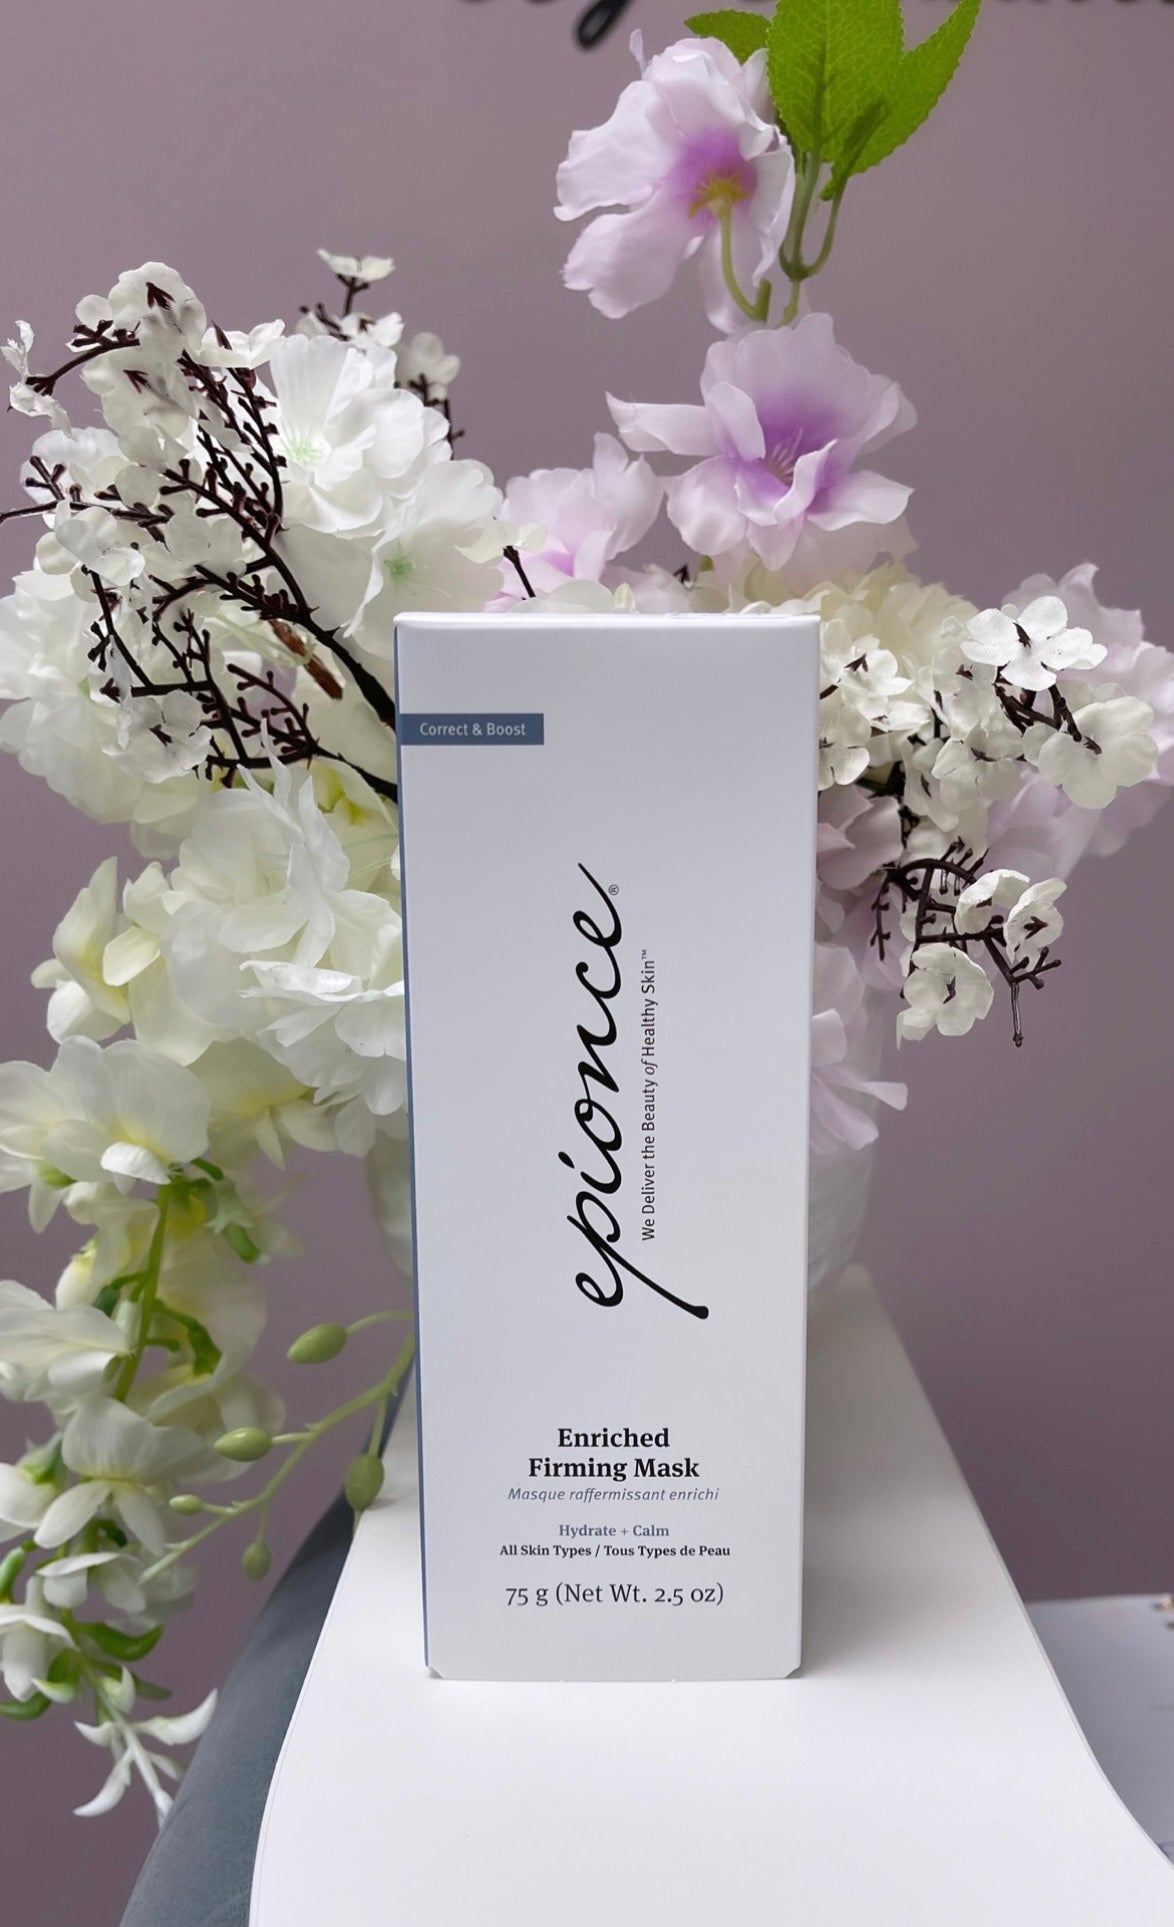 EPIONCE enriched firming mask(for existing clientele only)